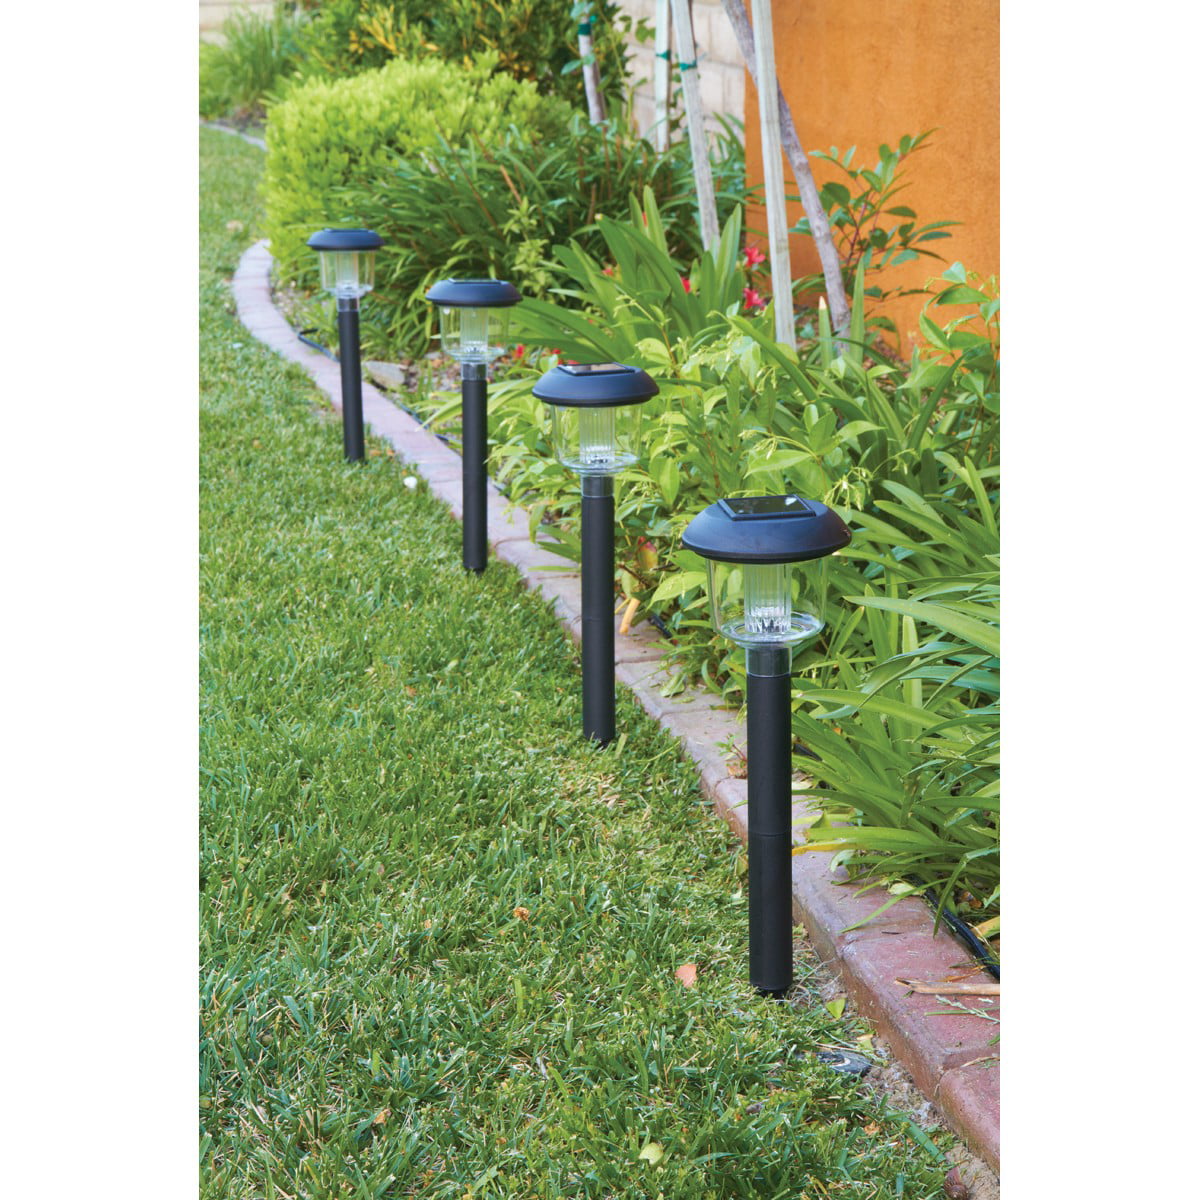 Luminar Outdoor 4 Piece LED Solar Pathway Light Set REDUCED! for Sale in  Renton, WA - OfferUp